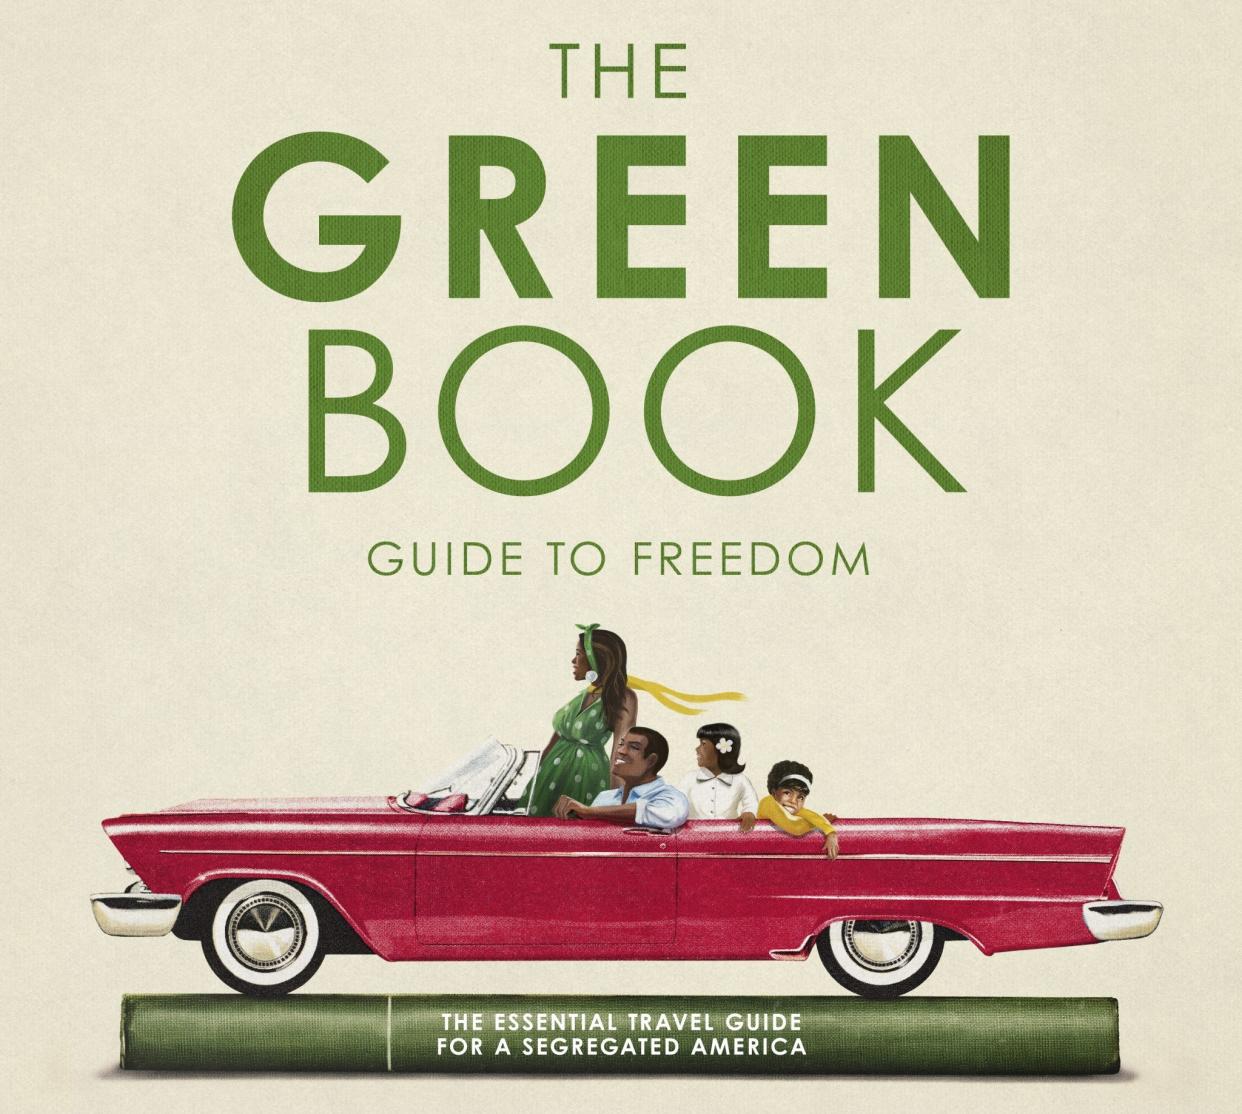 Screenings of the documentary “The Green Book: Guide to Freedom” on Friday and Feb. 24 are part of the Black History Month programming by the Ohio History Connection.